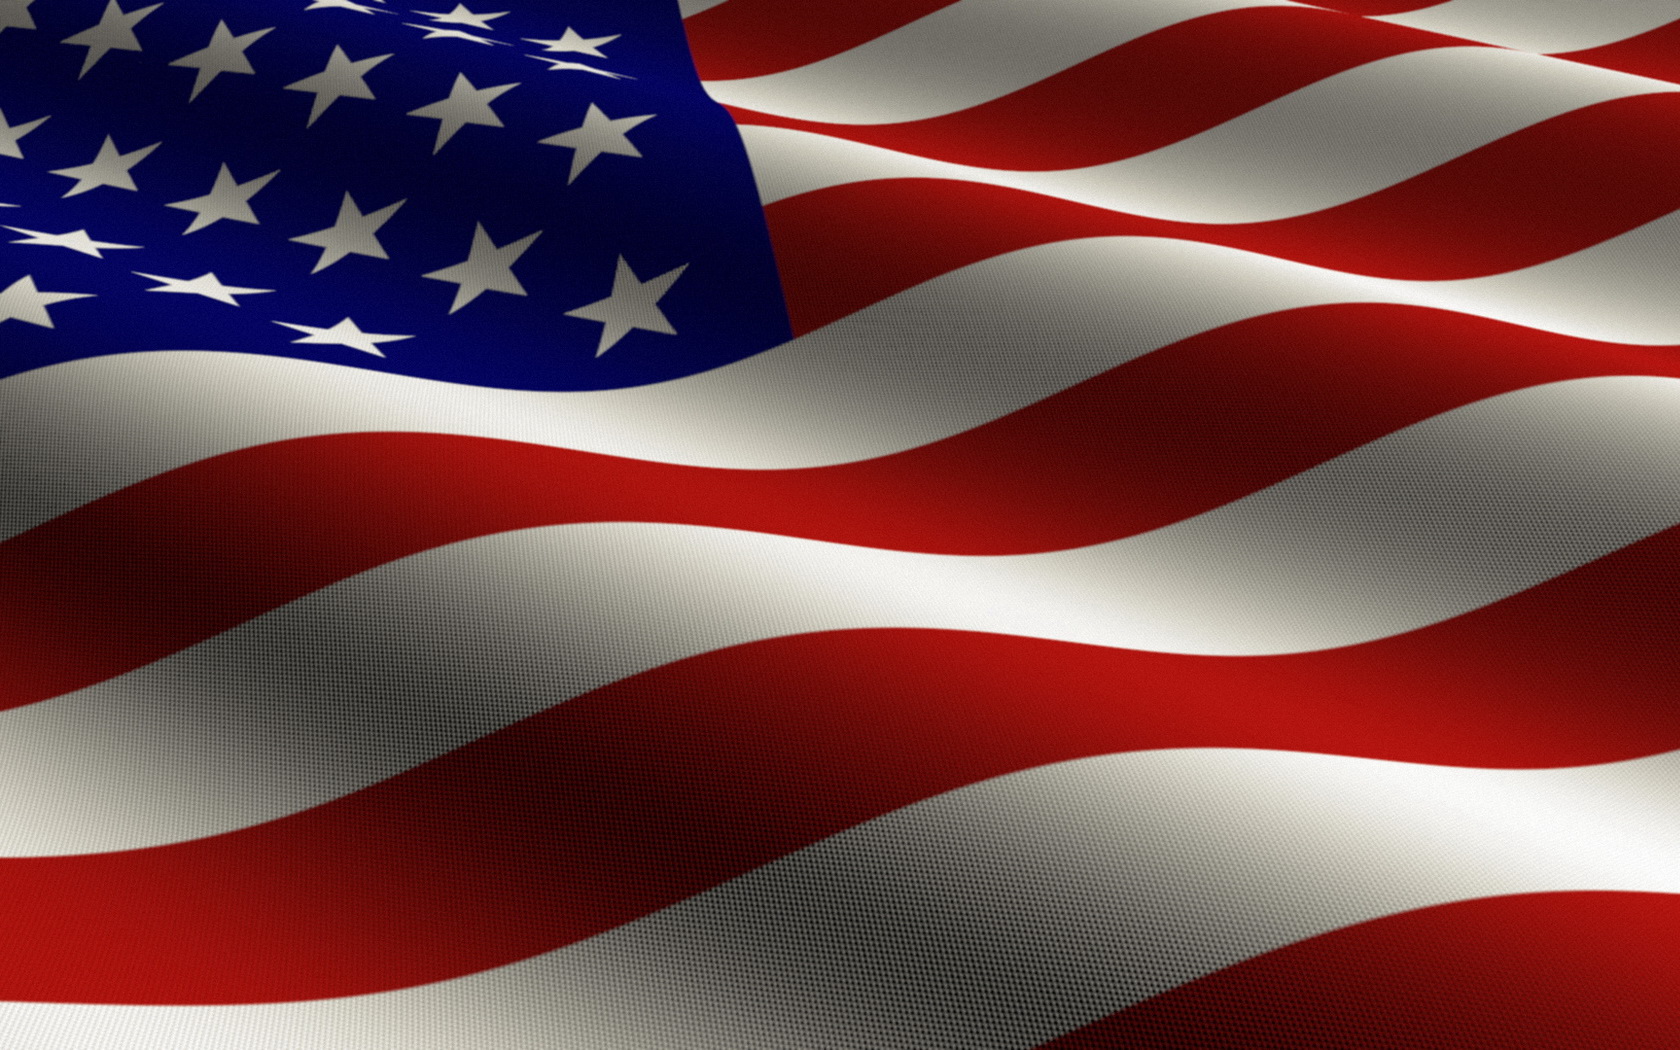 American Flag Backgrounds for Powerpoint Templates - PPT Backgrounds Regarding American Flag Powerpoint Template